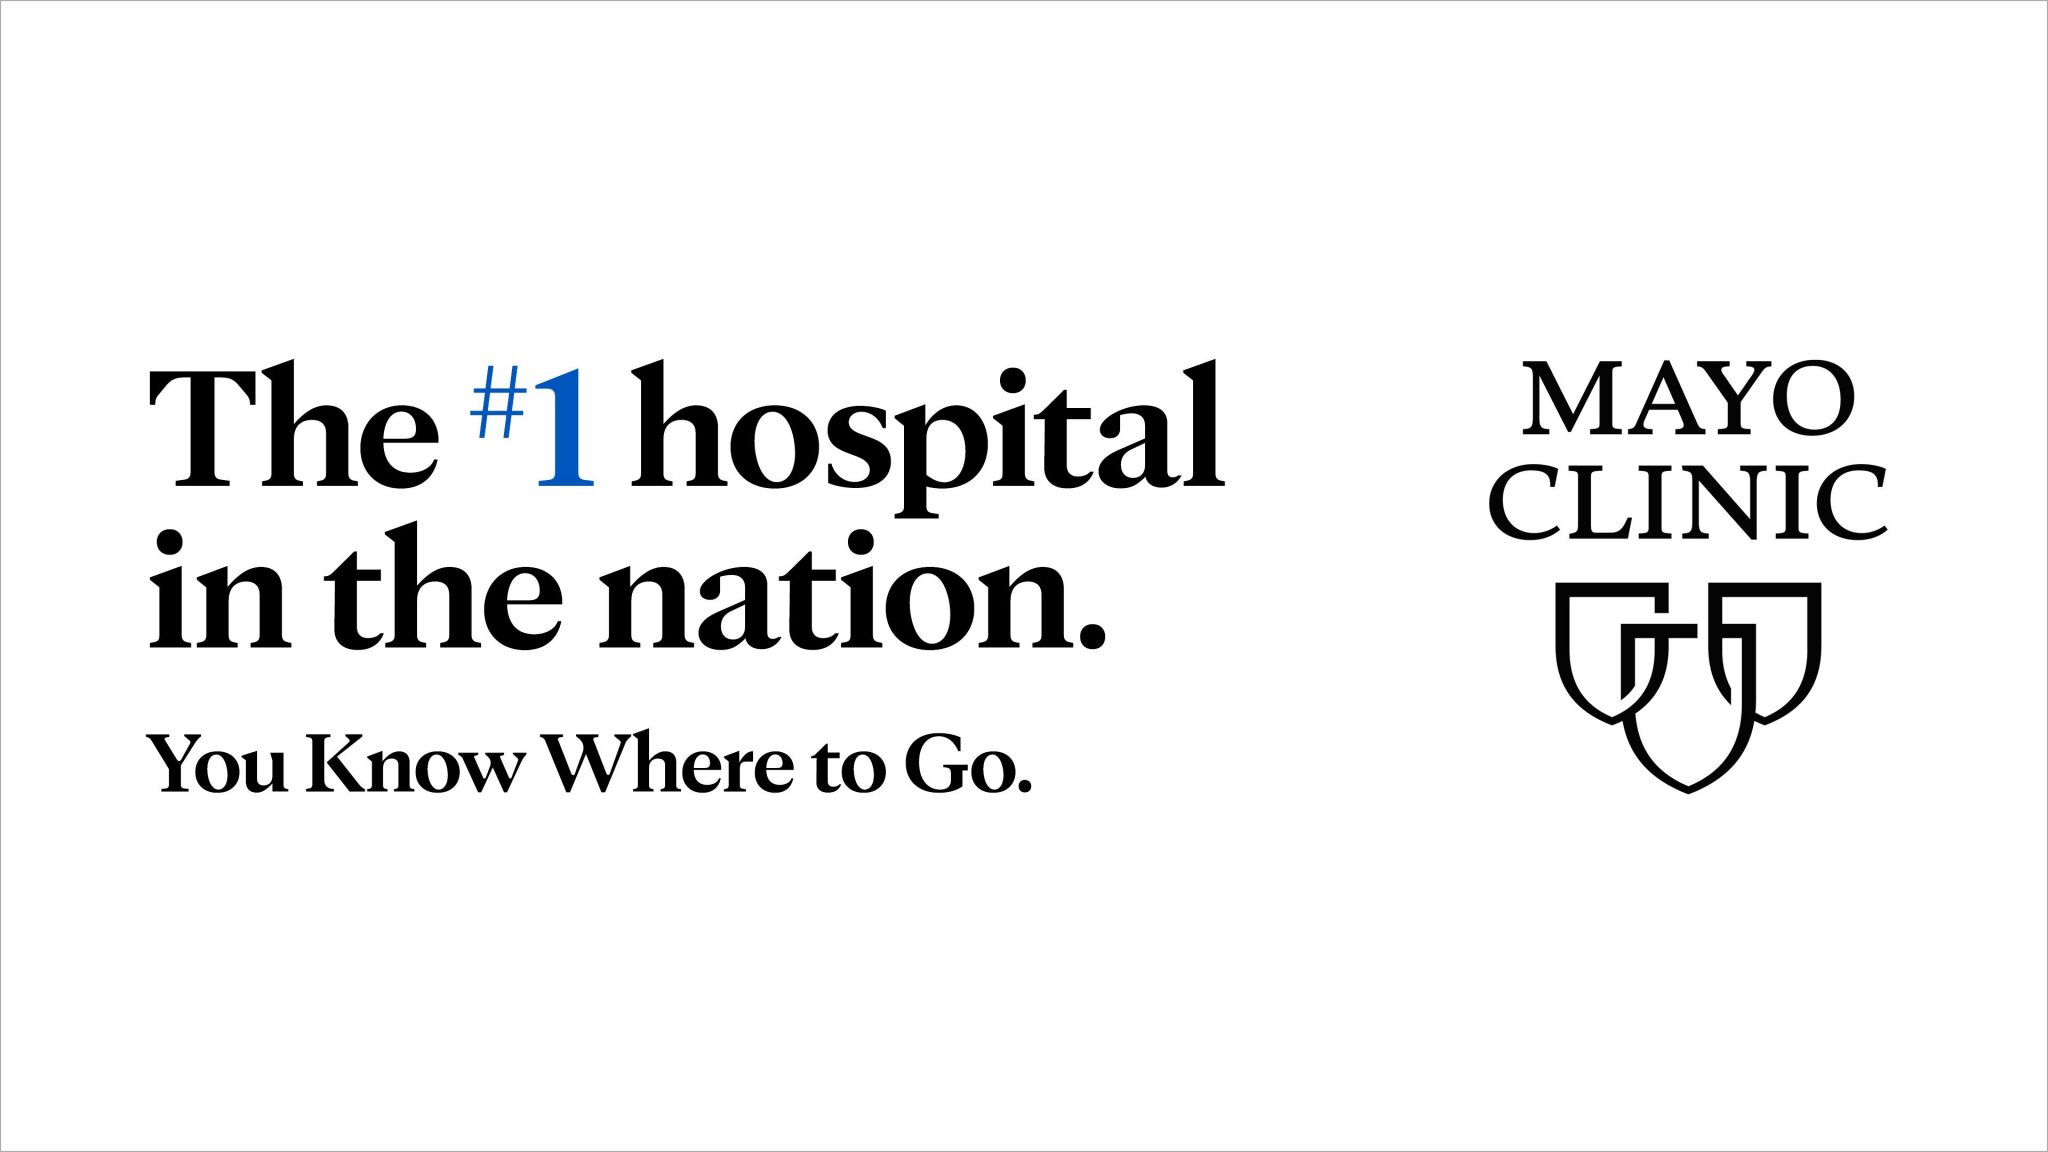 mayo-clinic-ranked-no-1-hospital-in-the-nation-by-u-s-news-world